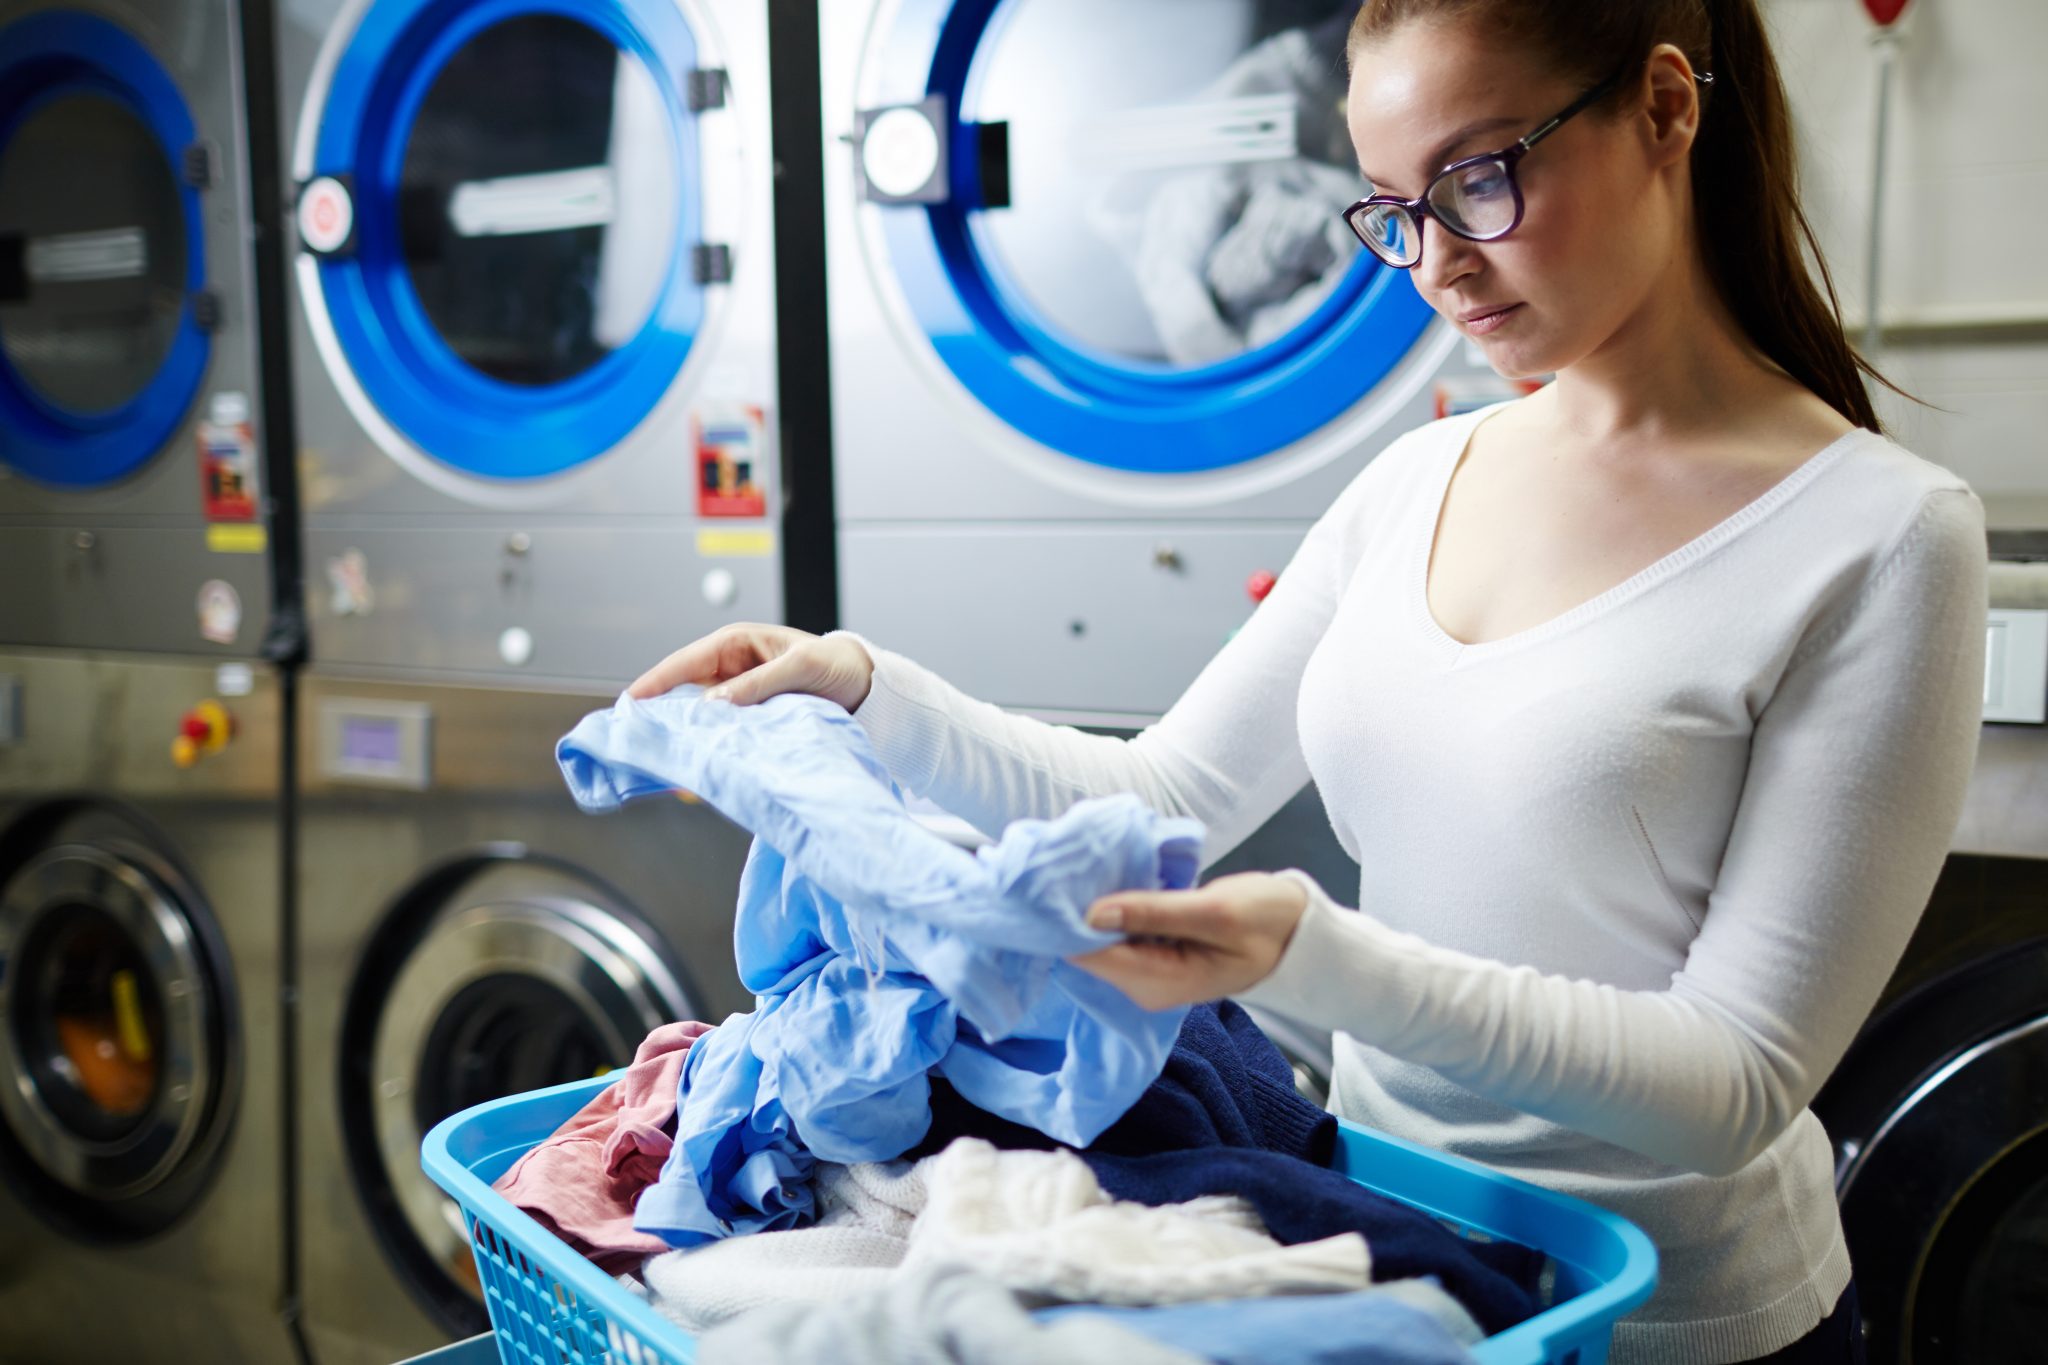 Baby Laundry: Caring for your babys clothes